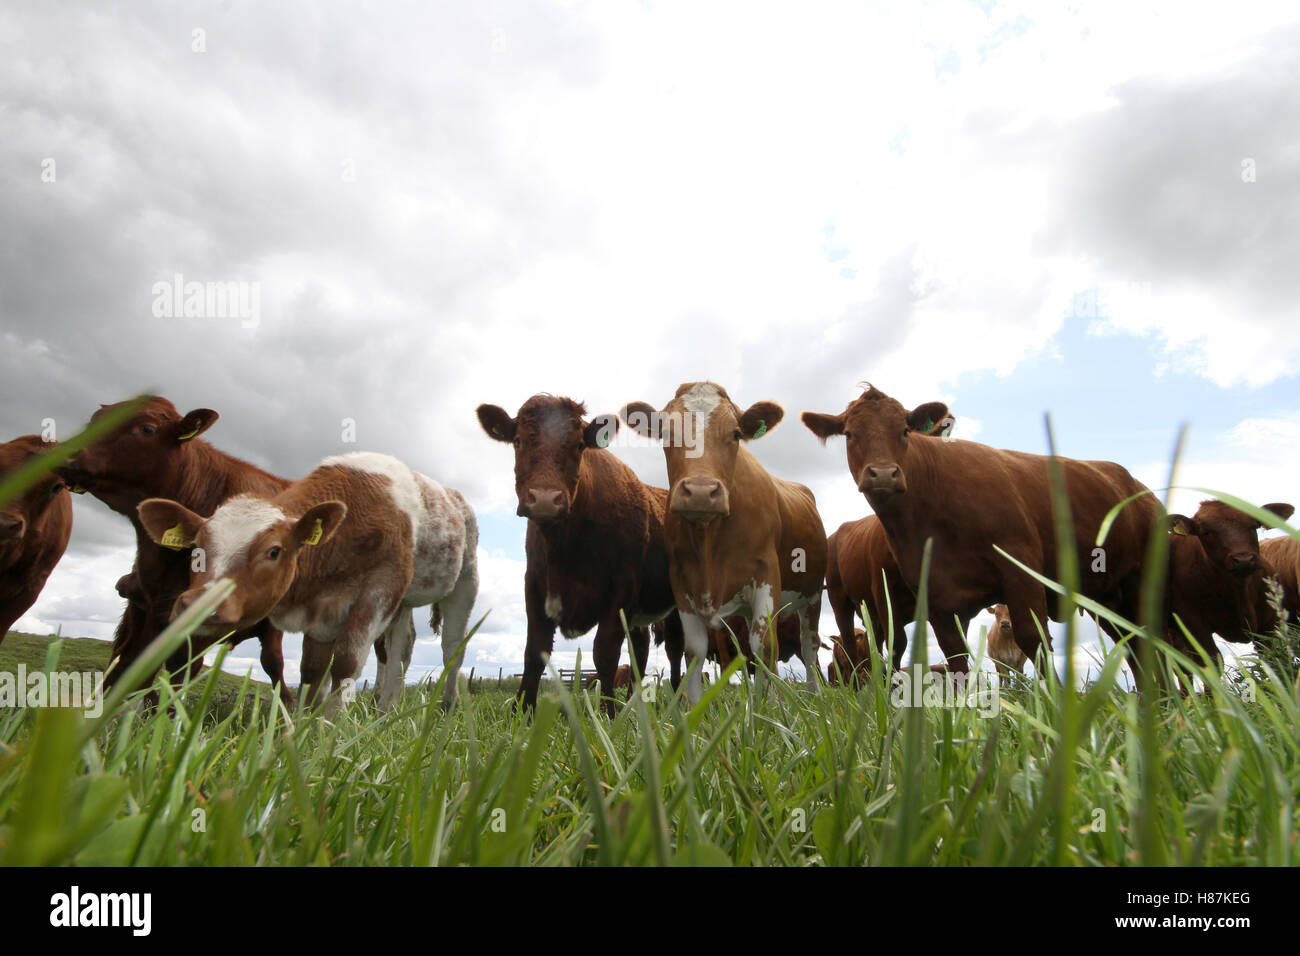 Cows and calves in field Stock Photo